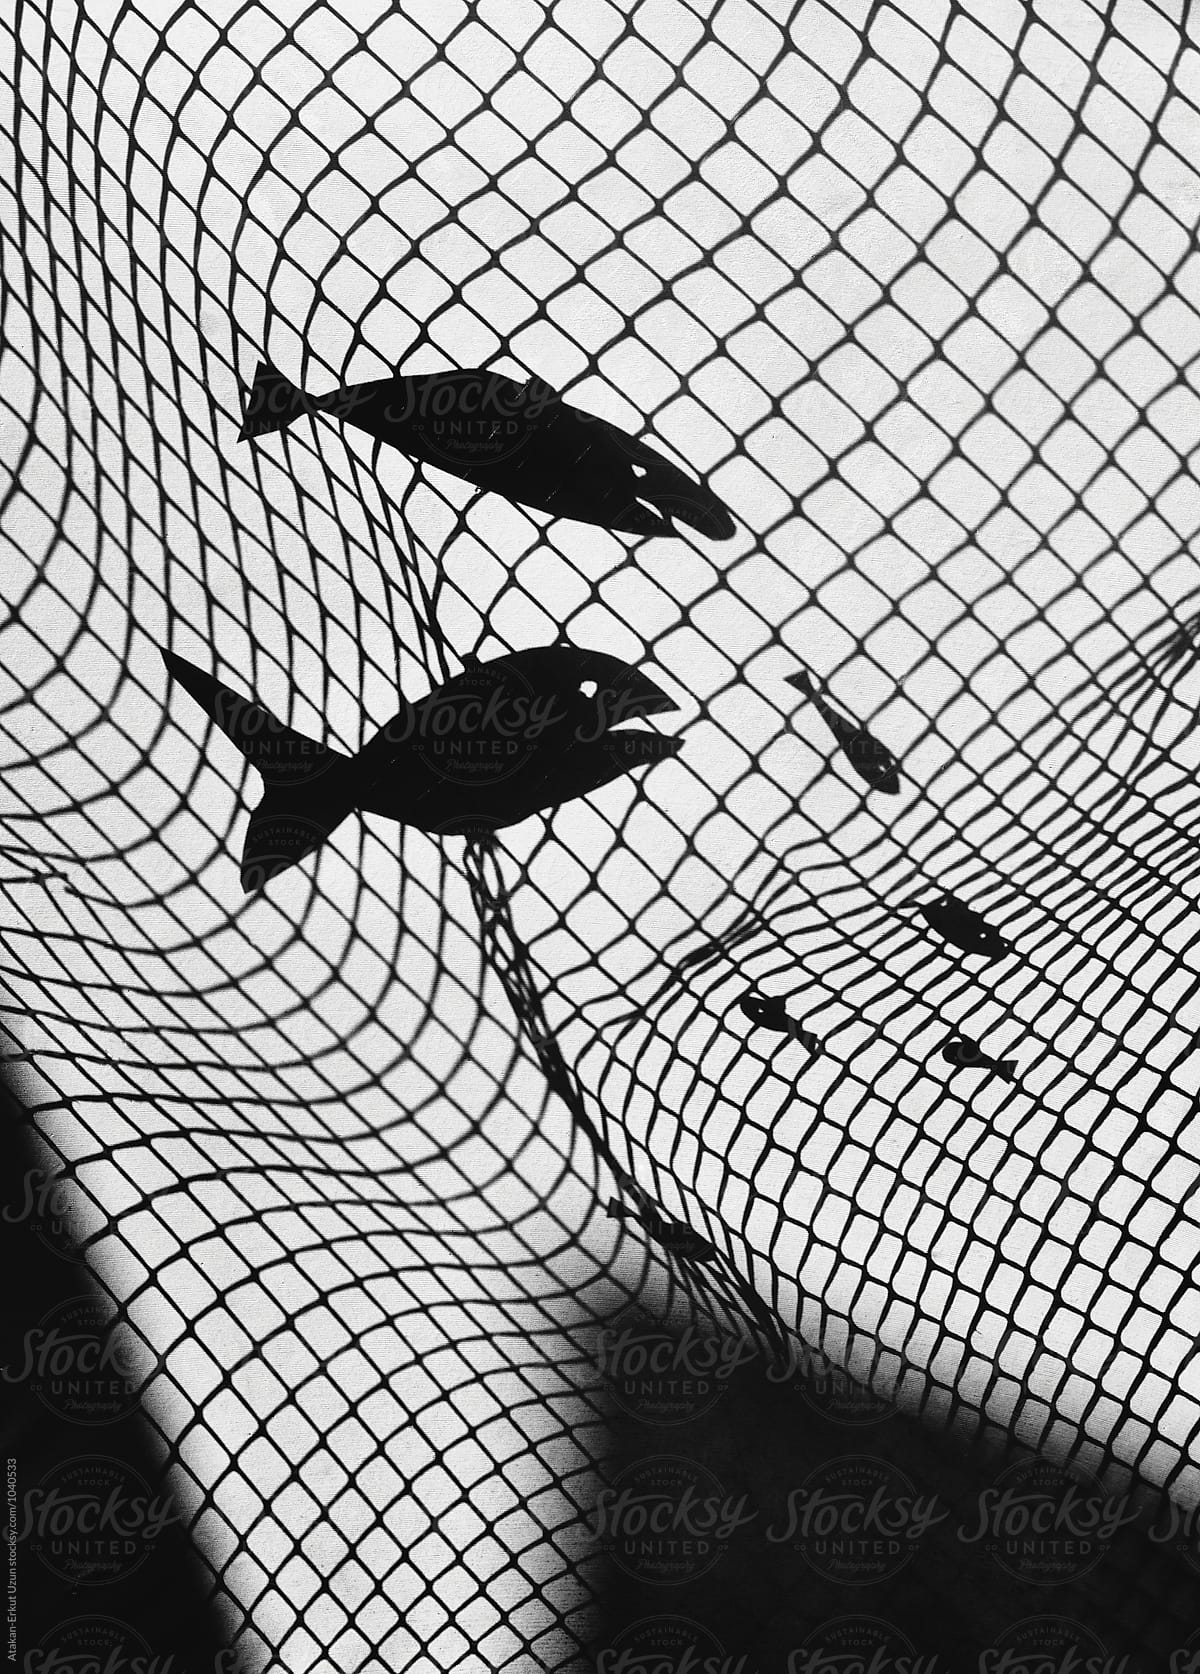 shadow play of fish caught in net